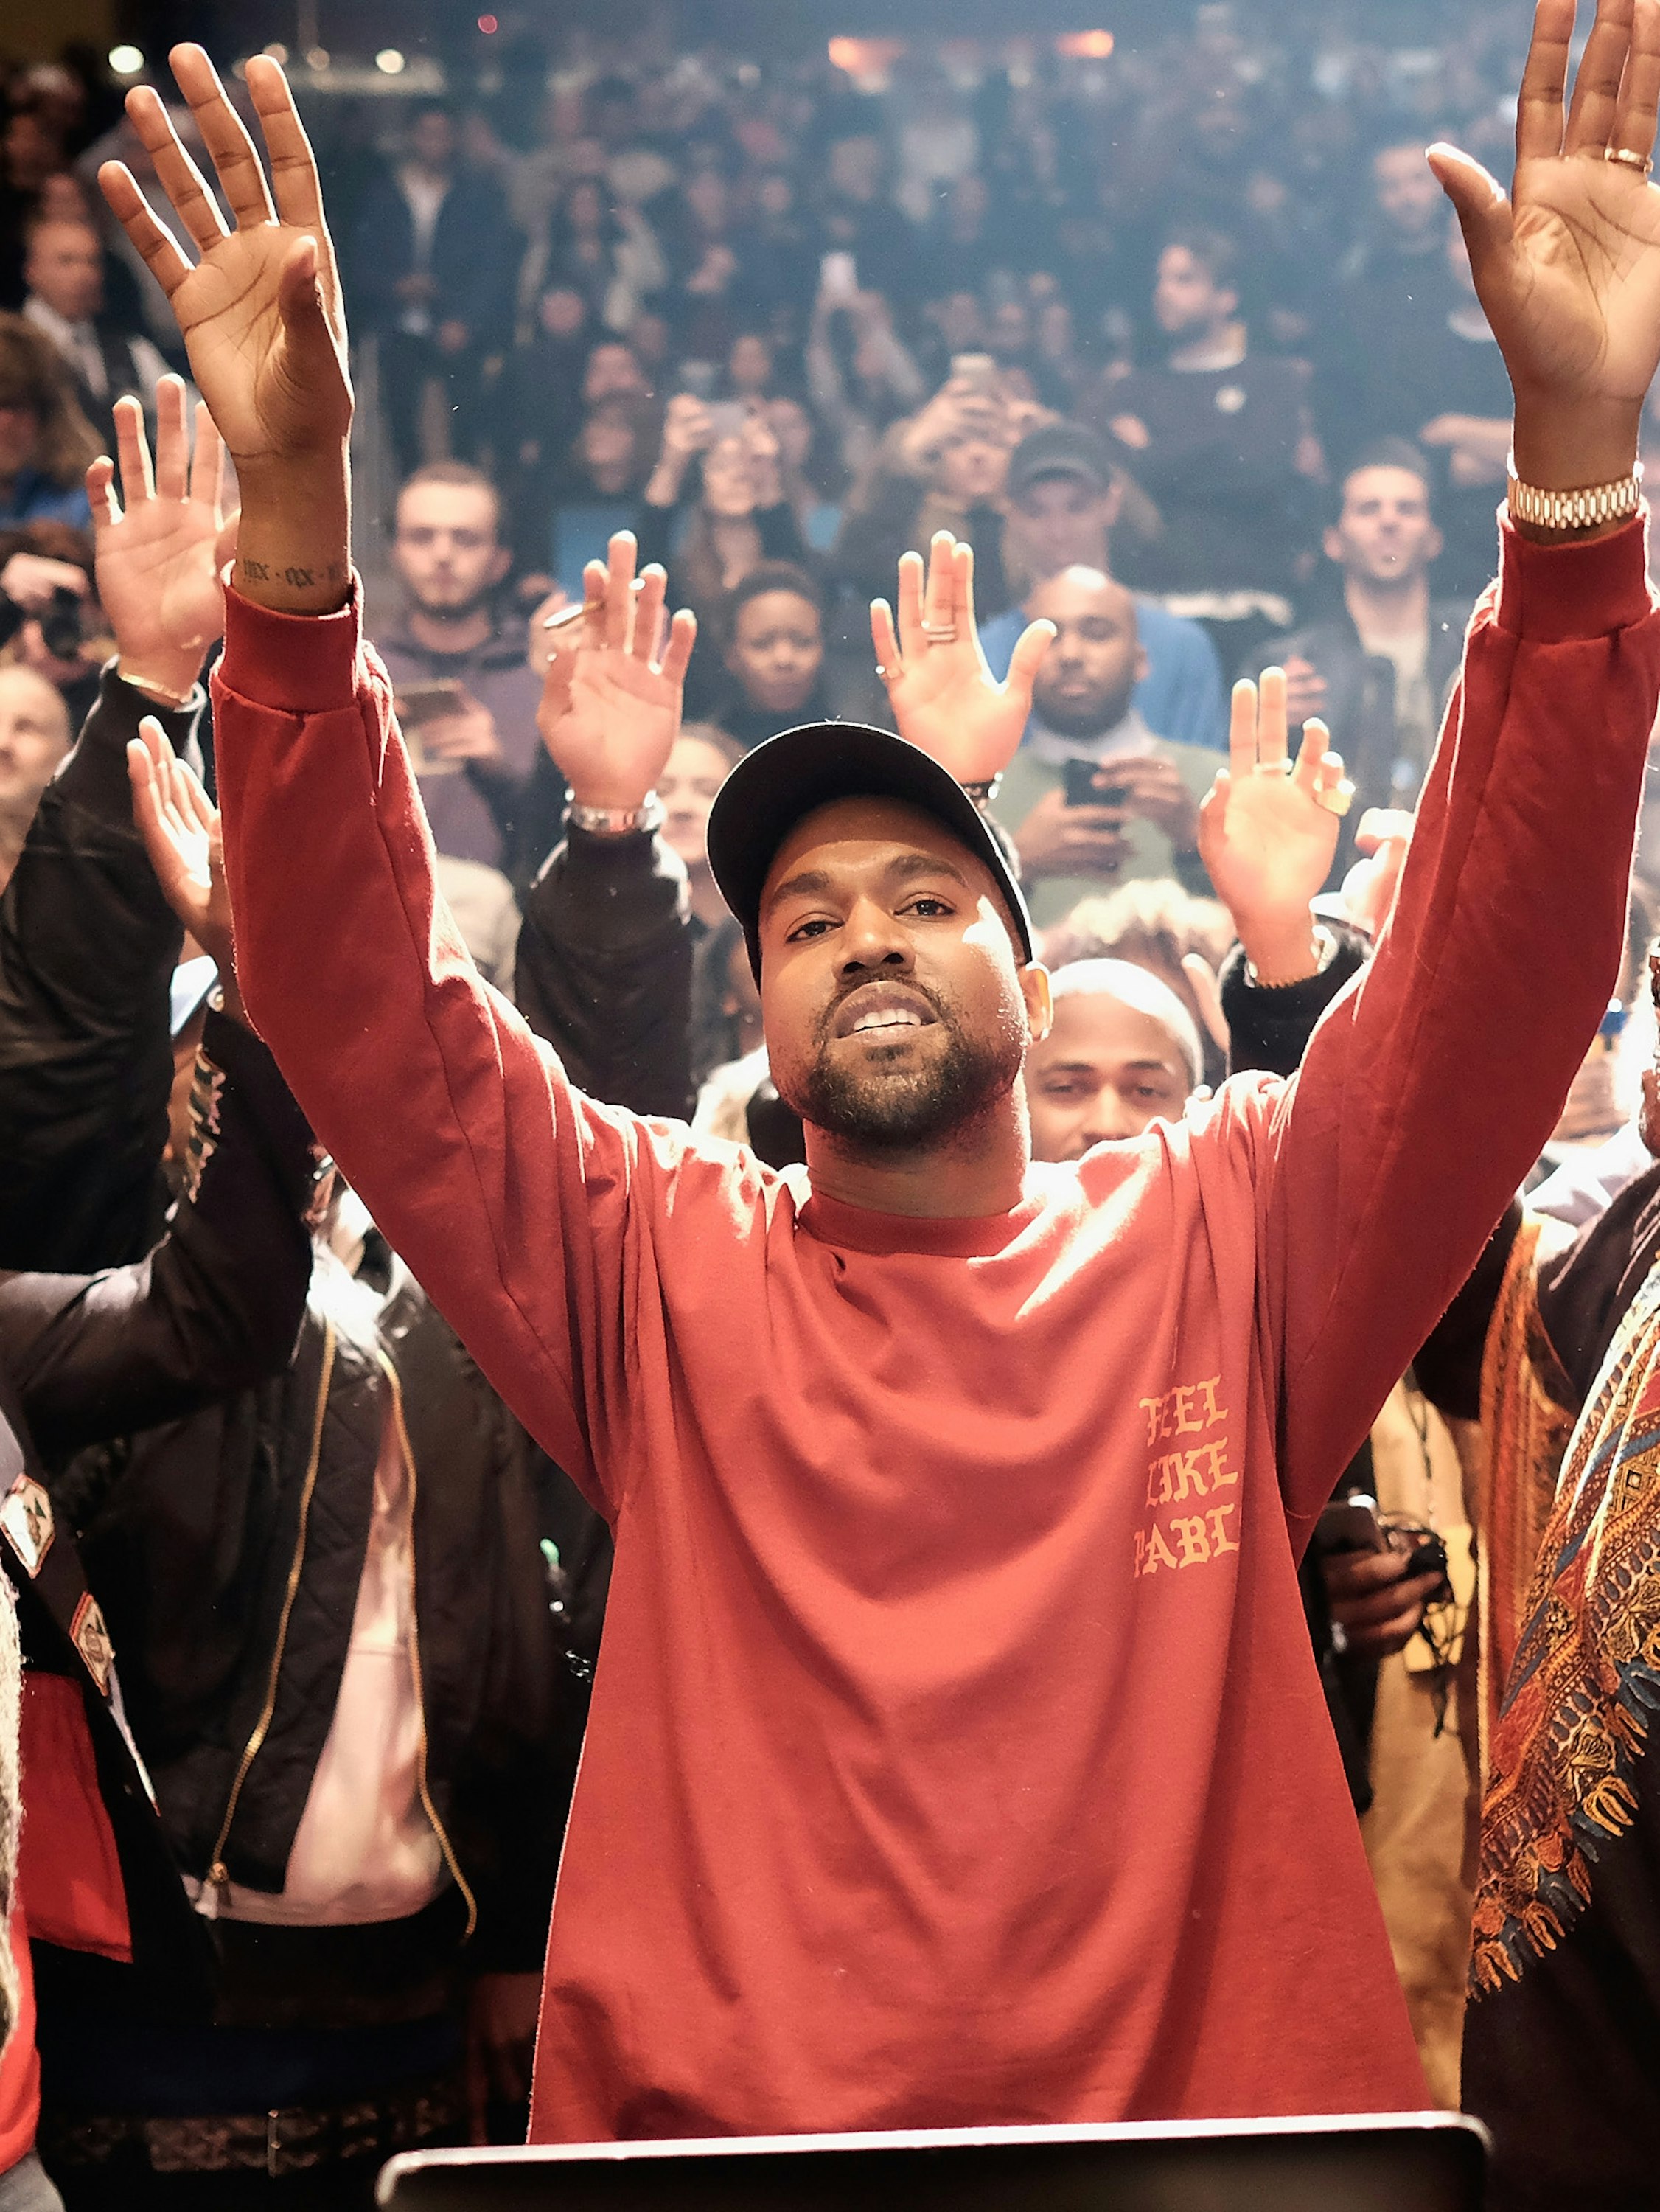 Kanye West's Best 'The Life of Pablo' Changes | Inverse